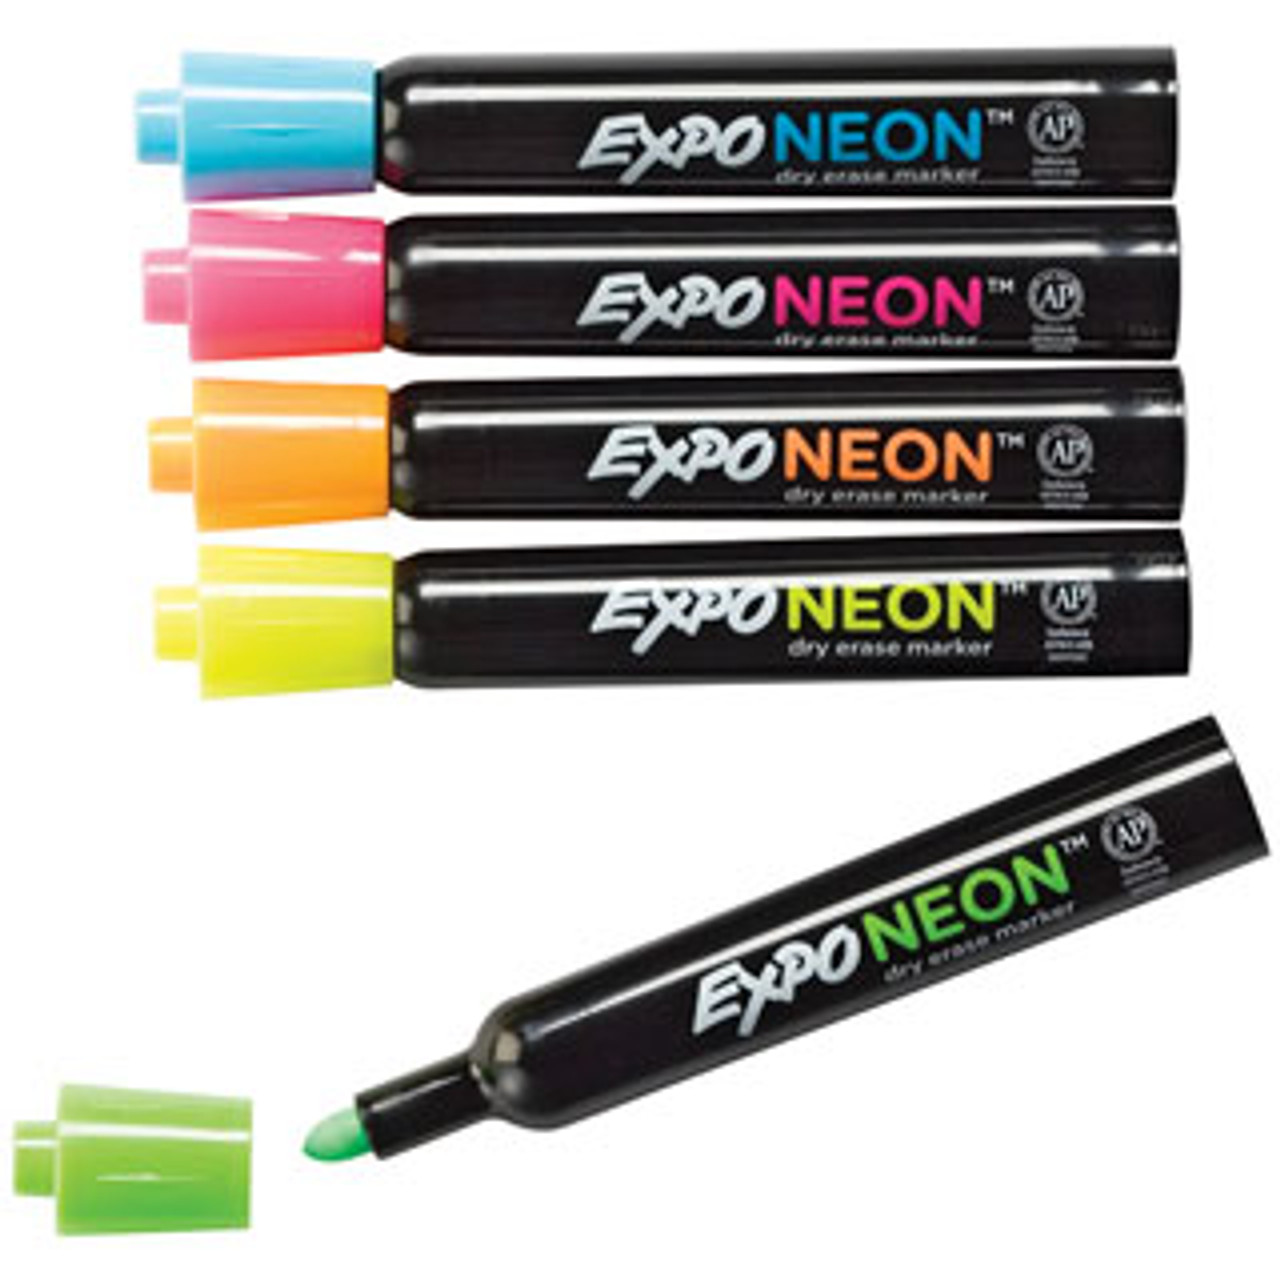 Set of 5 Dry Erase Fluorescent Neon Markers by Expo